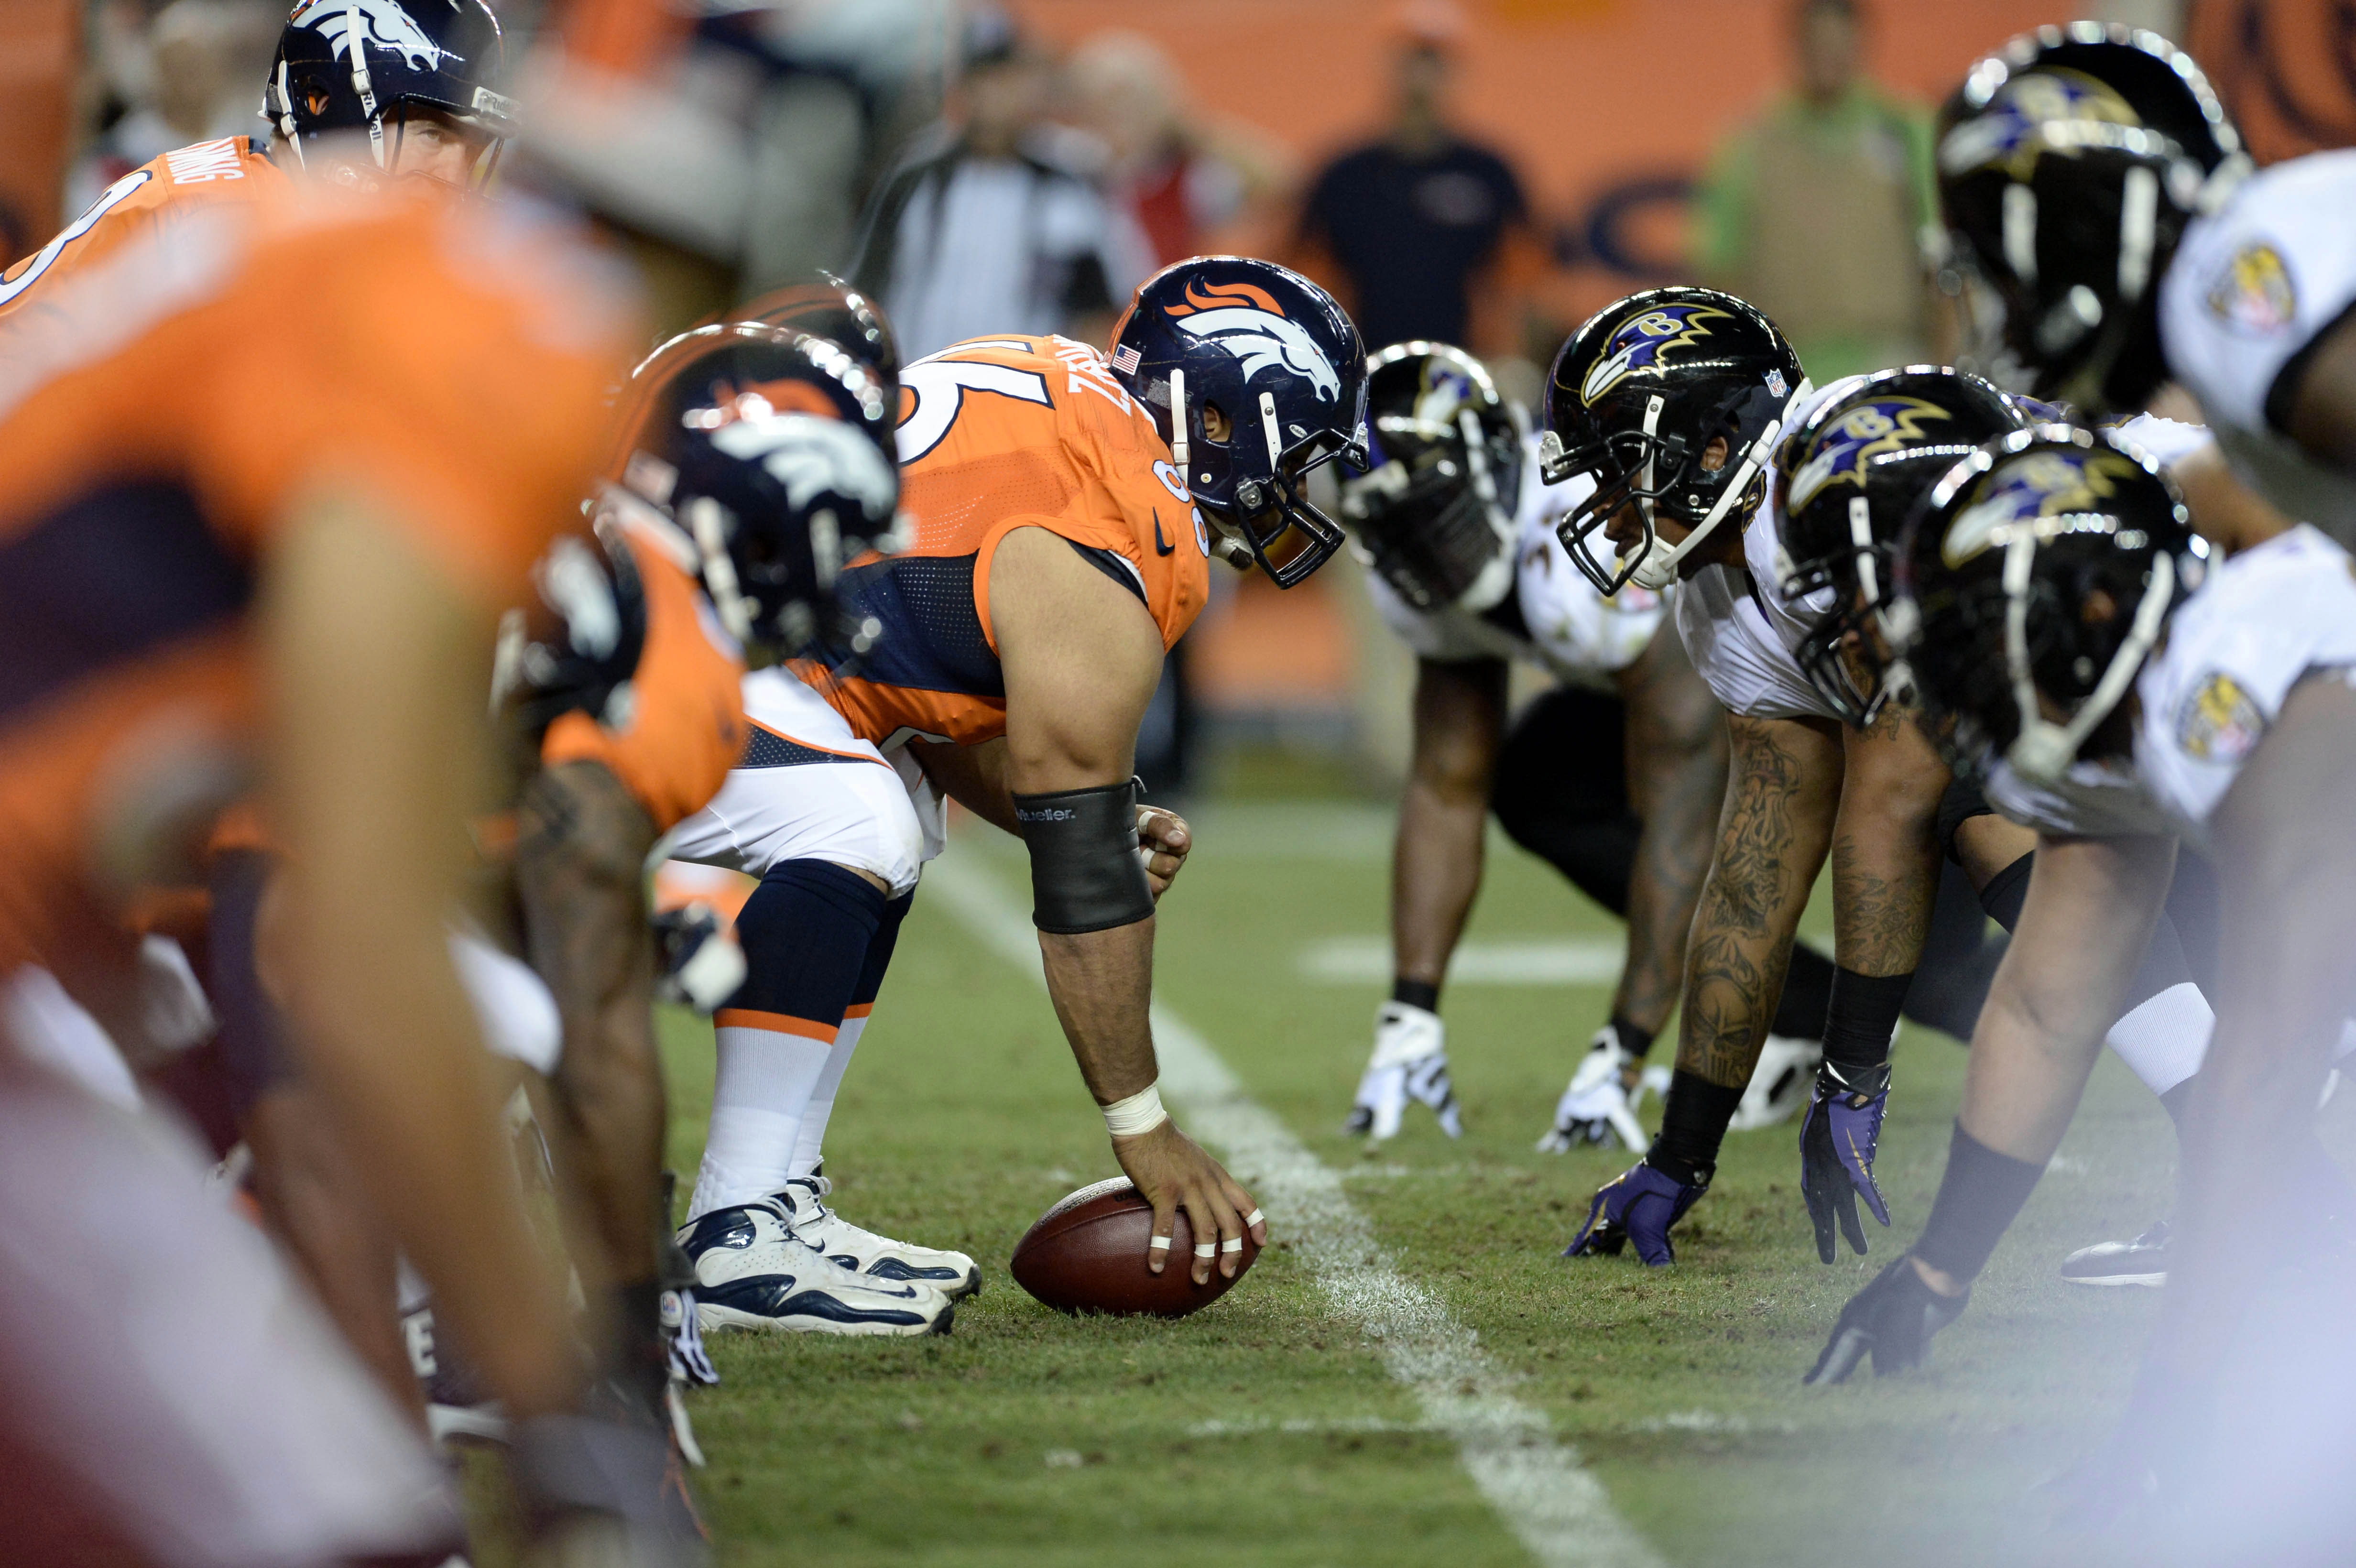 Ravens at Broncos is among Week 1's marquee games. (Ron Chenoy, USA TODAY Sports) 